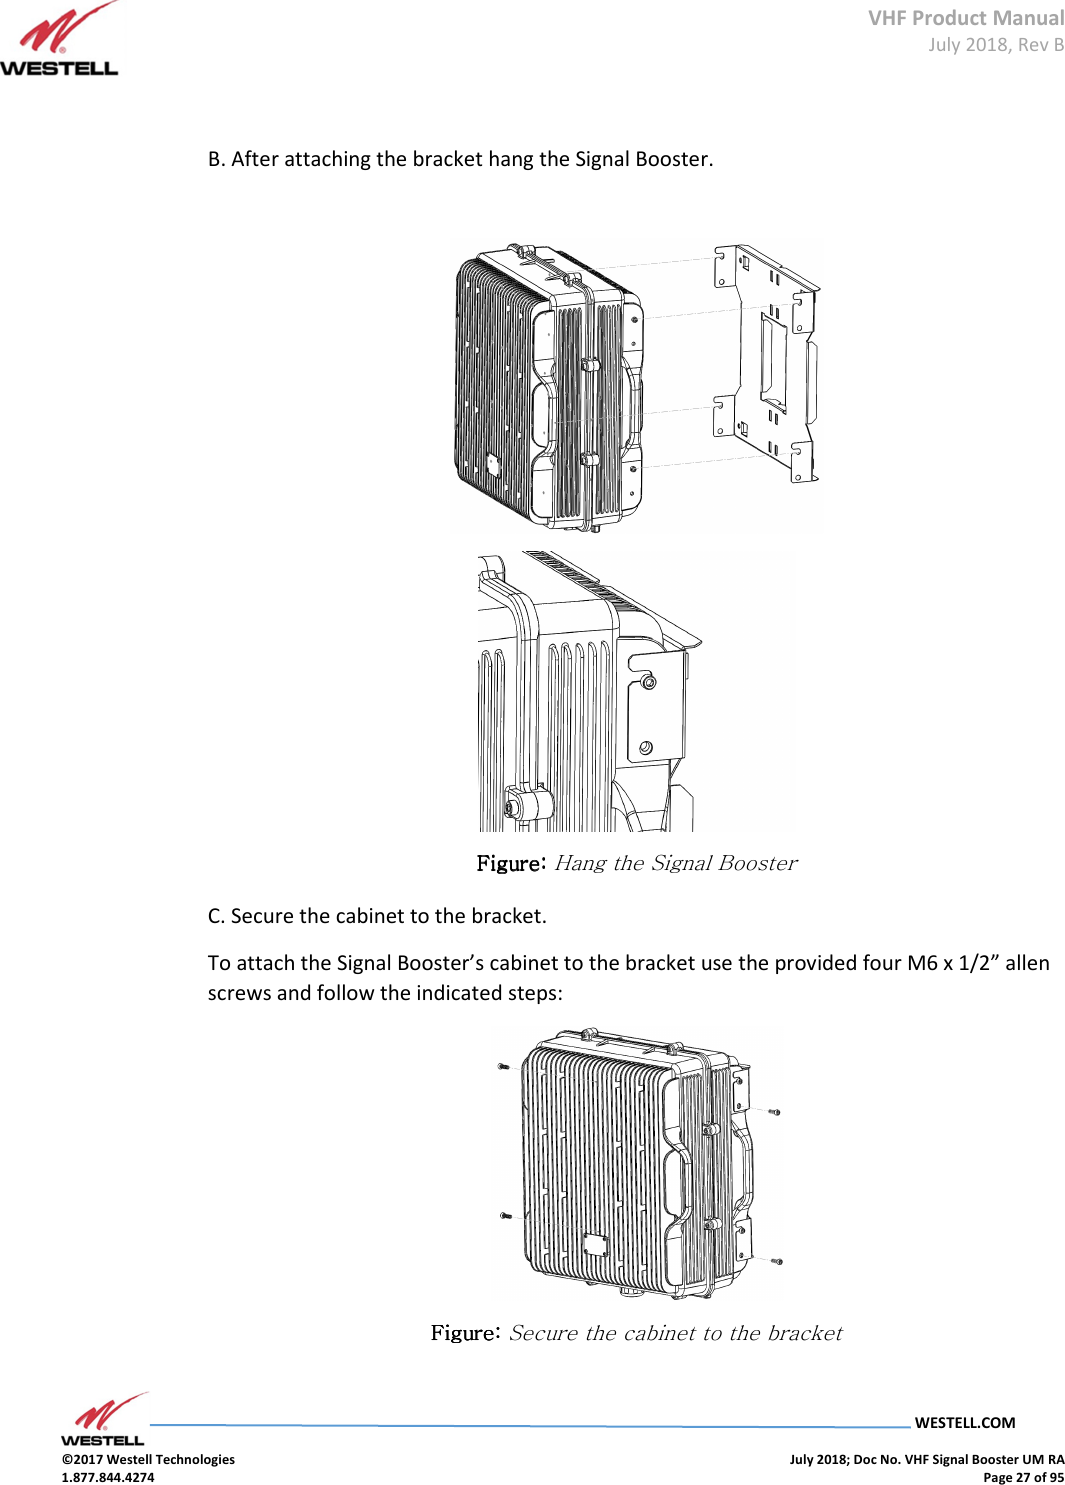 VHF Product Manual July 2018, Rev B   WESTELL.COM  ©2017 Westell Technologies    July 2018; Doc No. VHF Signal Booster UM RA 1.877.844.4274    Page 27 of 95   B. After attaching the bracket hang the Signal Booster.    Figure: Figure: Figure: Figure: Hang the Signal Booster C. Secure the cabinet to the bracket. To attach the Signal Booster’s cabinet to the bracket use the provided four M6 x 1/2” allen screws and follow the indicated steps:  Figure: Figure: Figure: Figure: Secure the cabinet to the bracket     